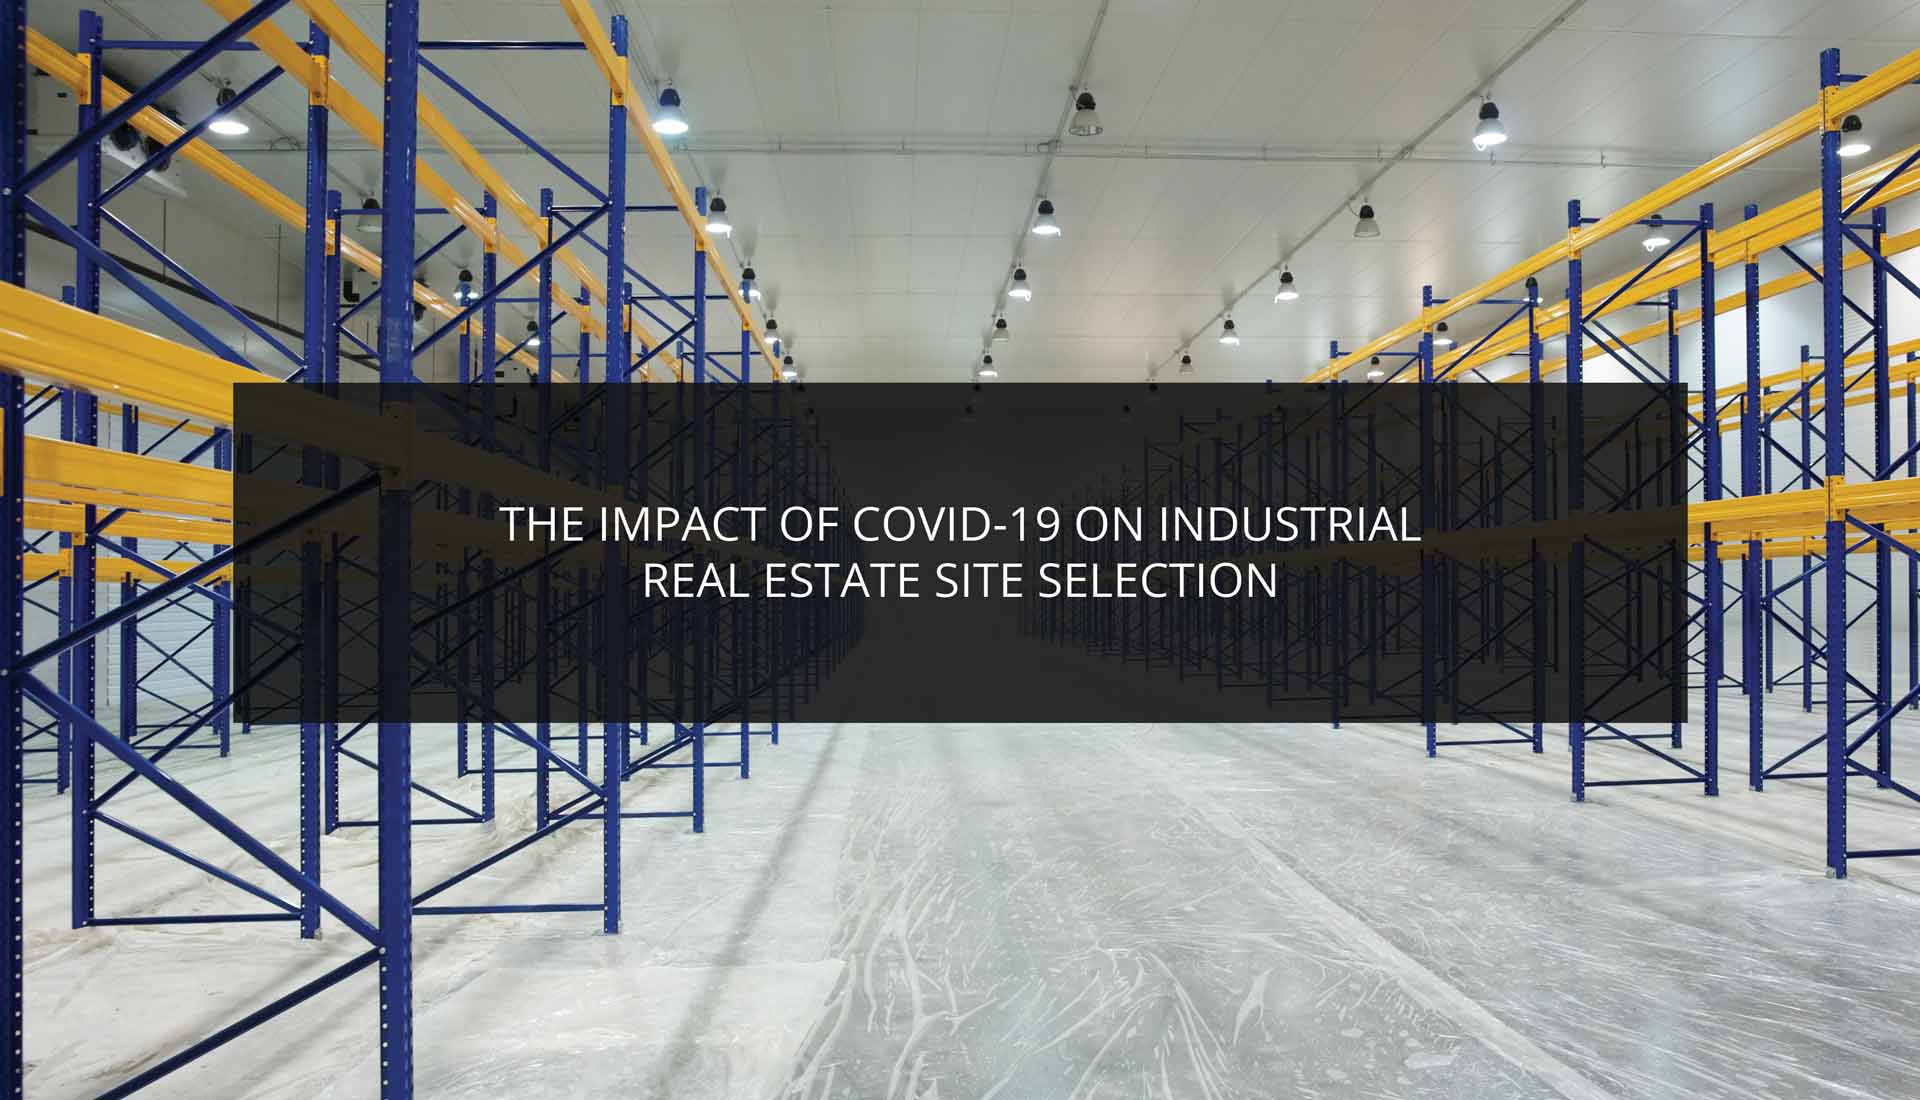 The Impact of COVID-19 on Industrial Real Estate Site Selection